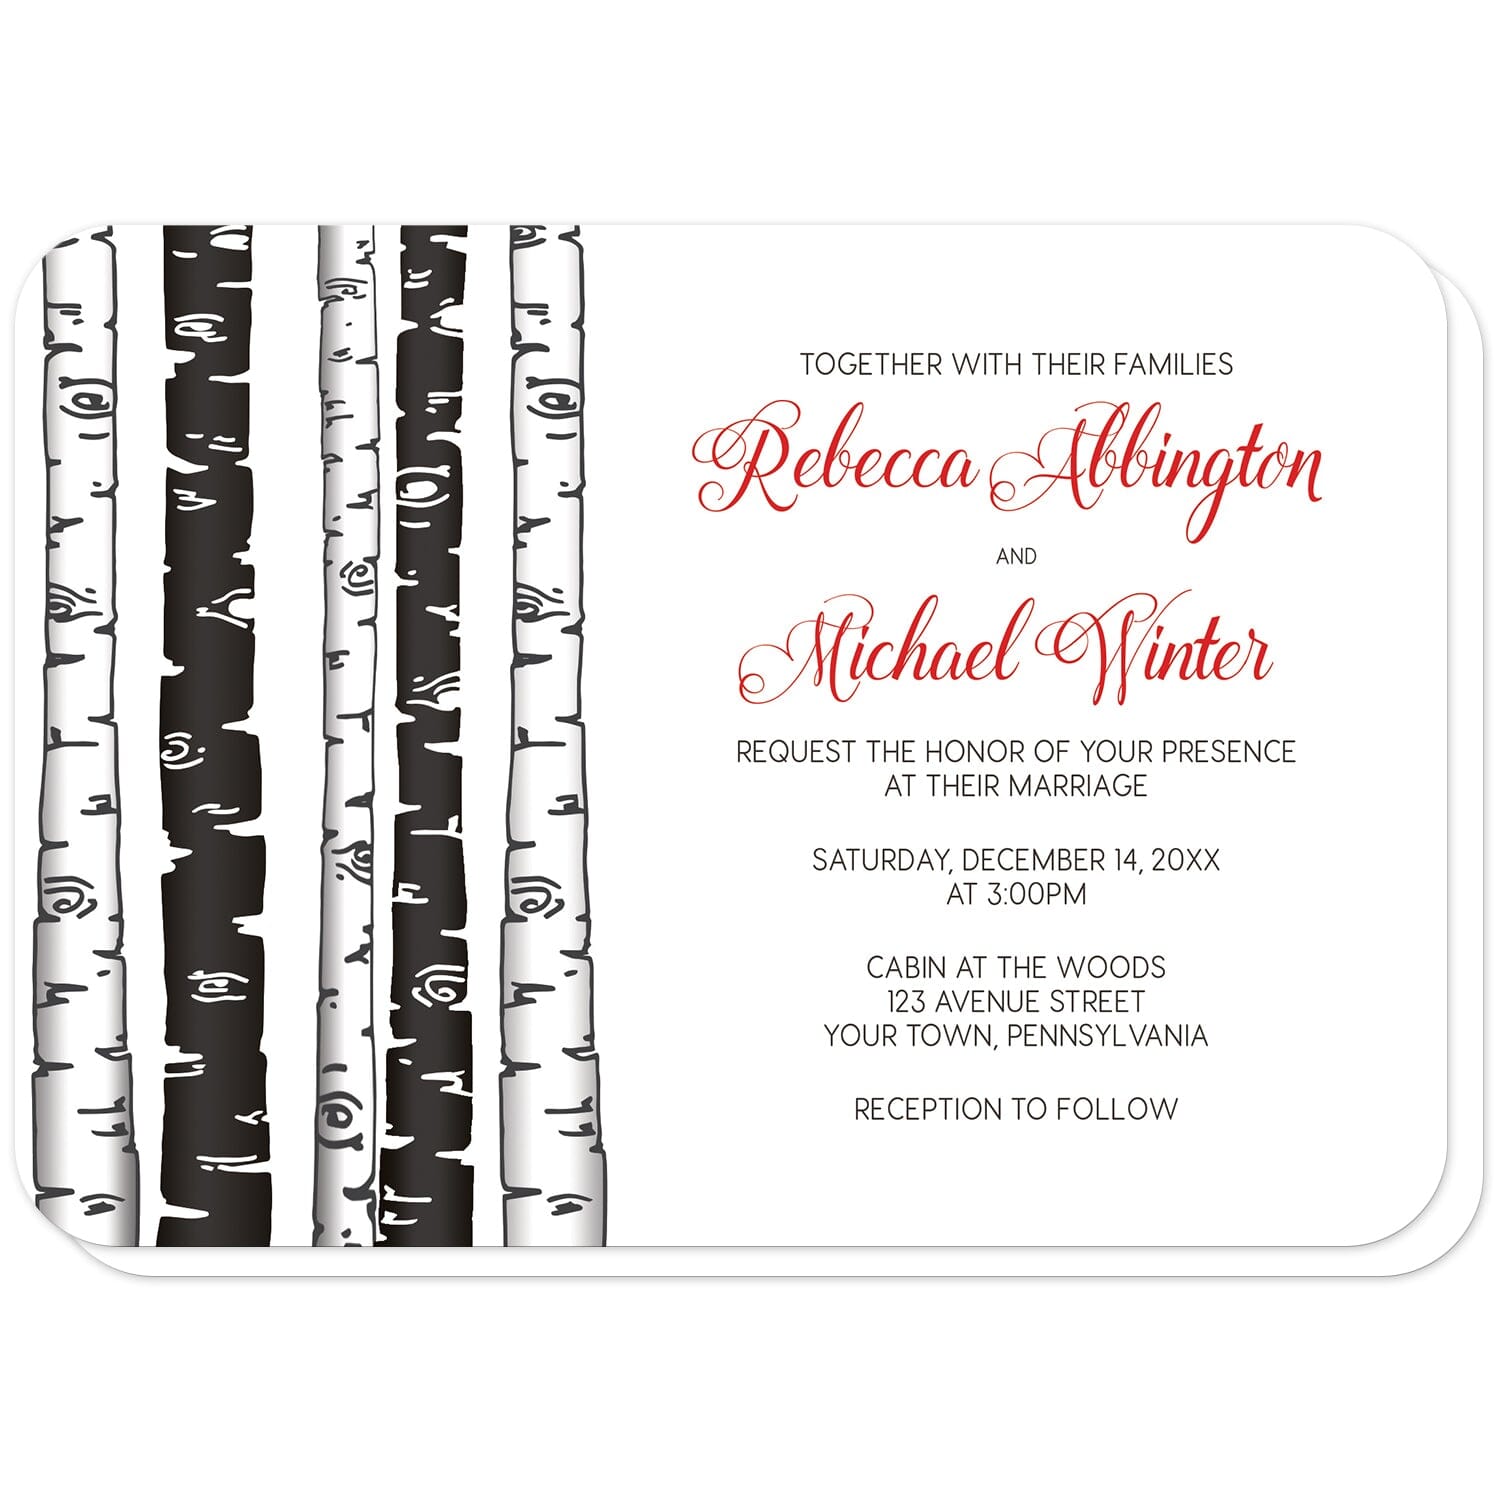 Monochrome Birch Tree with Red Wedding Invitations (with rounded corners) at Artistically Invited. Monochrome birch tree with red wedding invitations with an alternating monochrome black and white birch trees illustration along the left side. Your personalized marriage celebration details are custom printed beside the trees in black with the couple's names printed in a red script font for a splash of color.